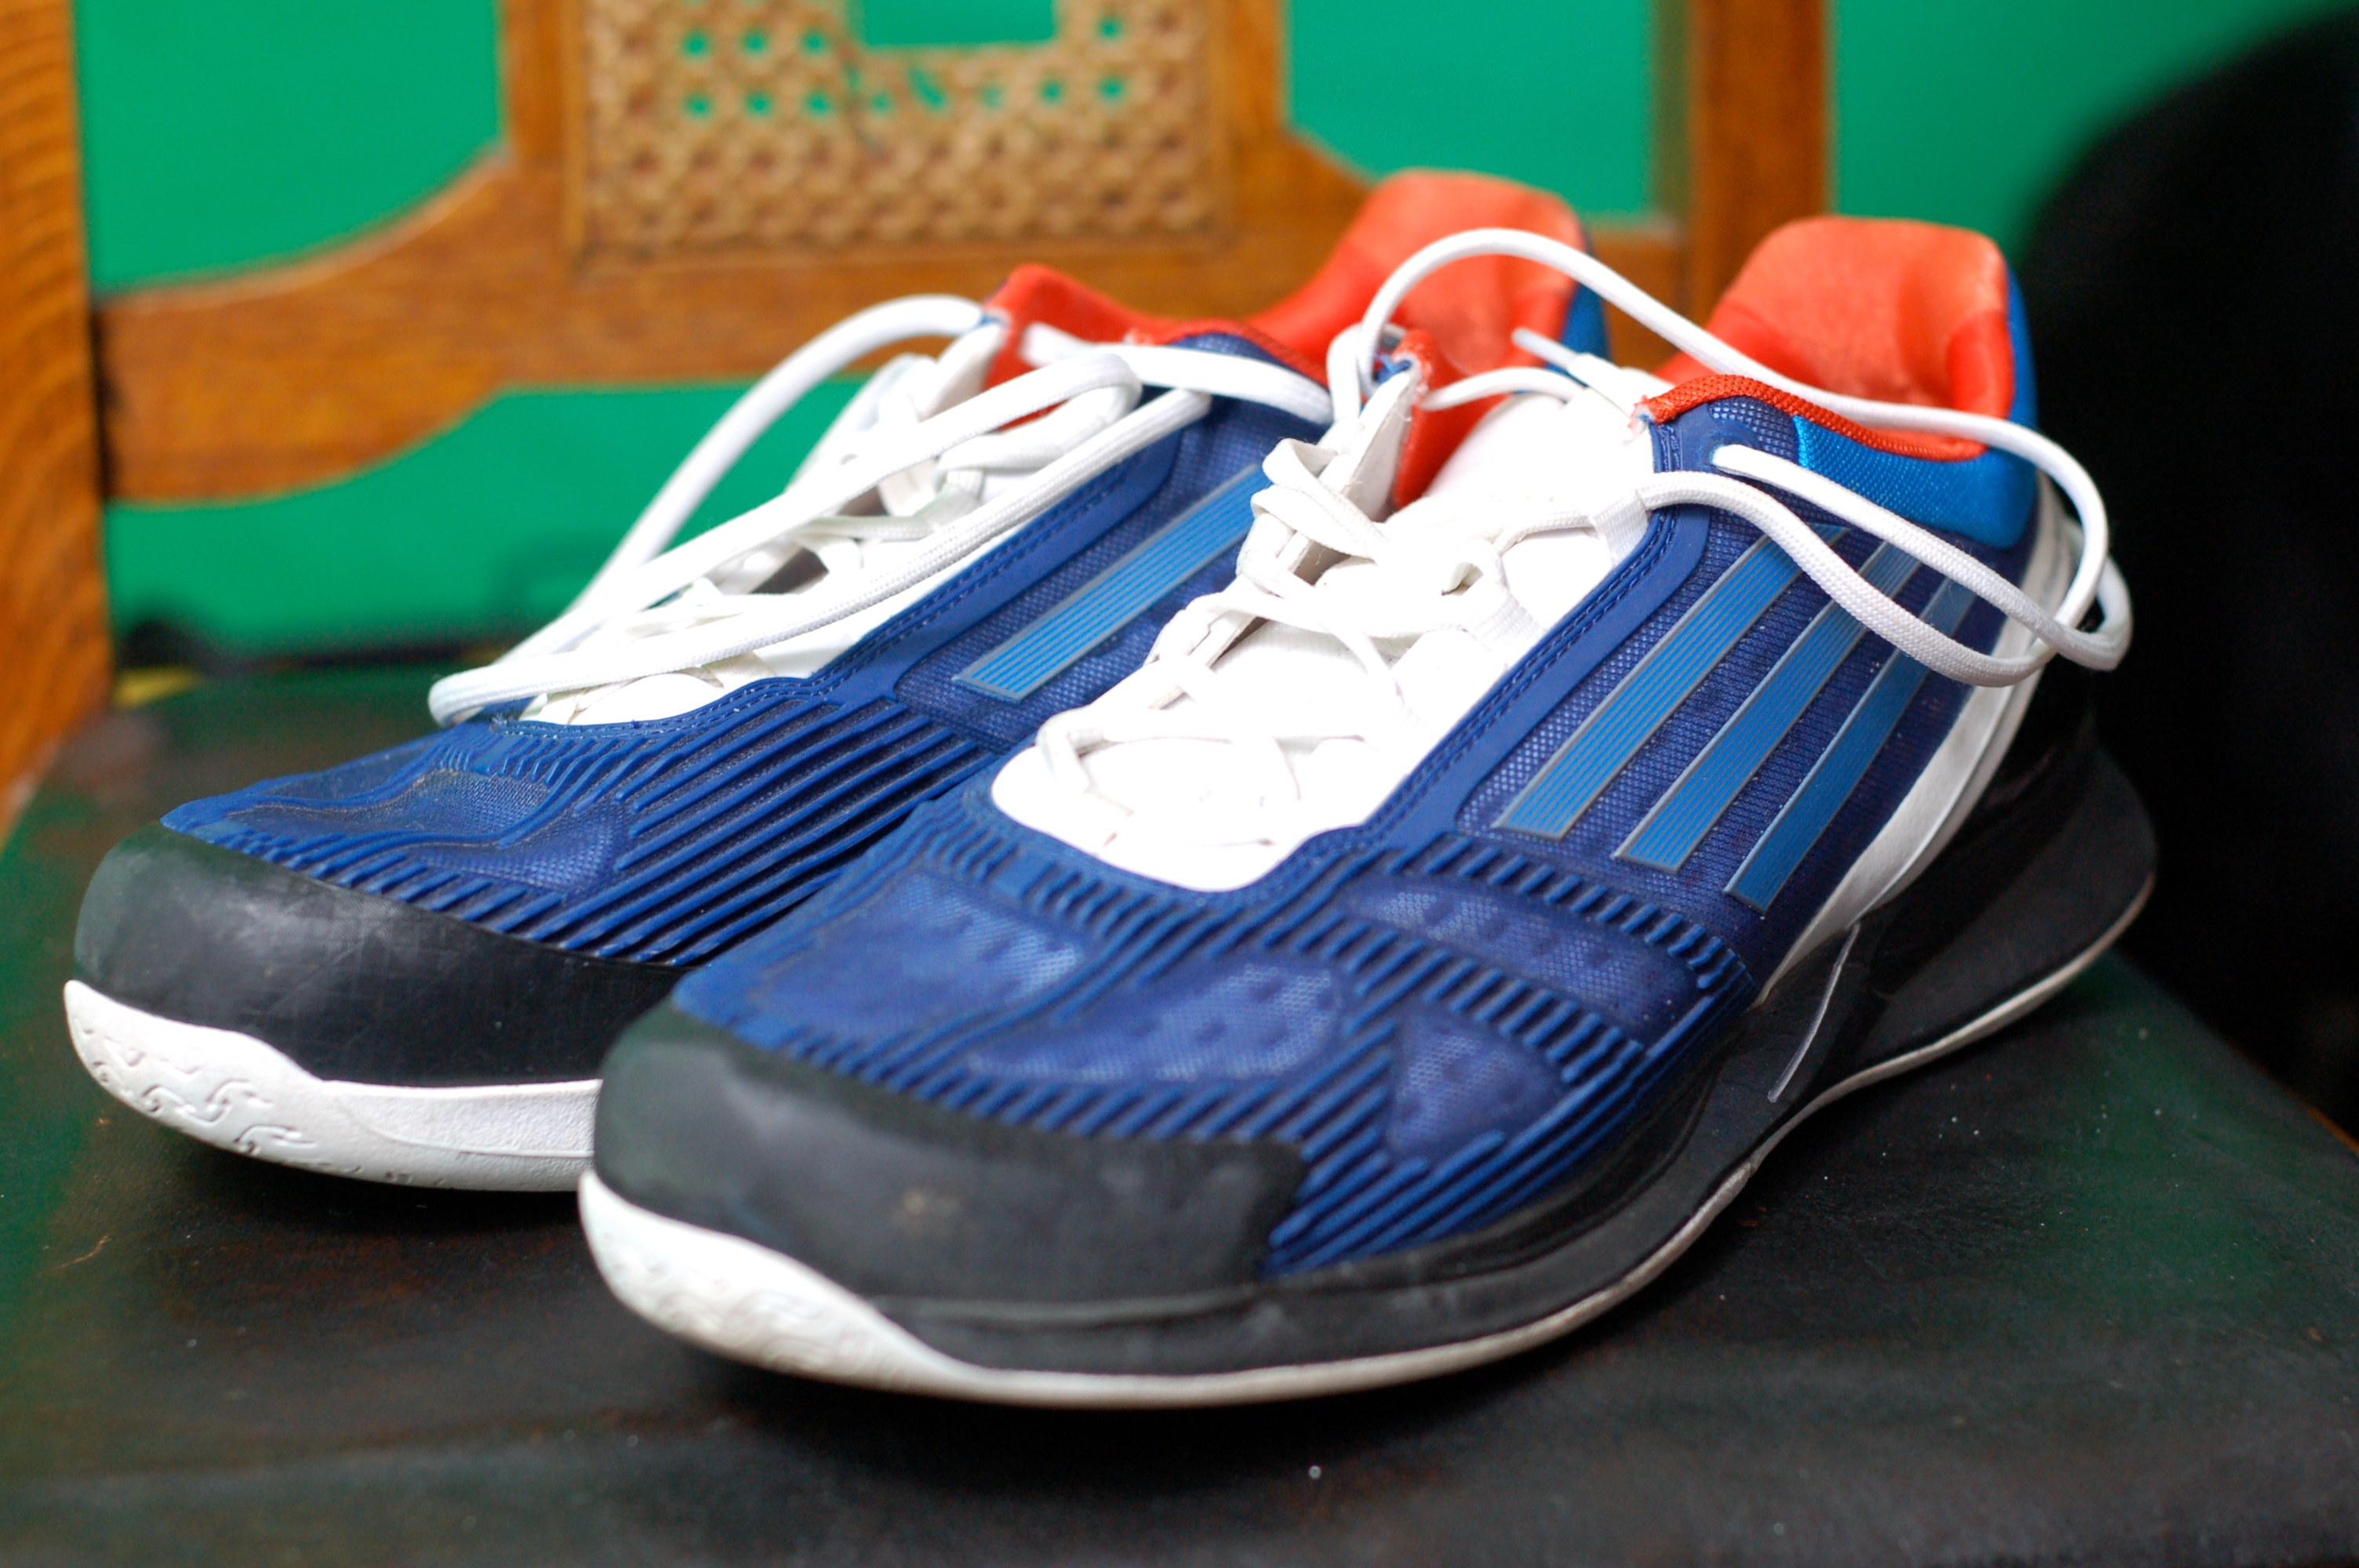 adidas approach tennis shoes review